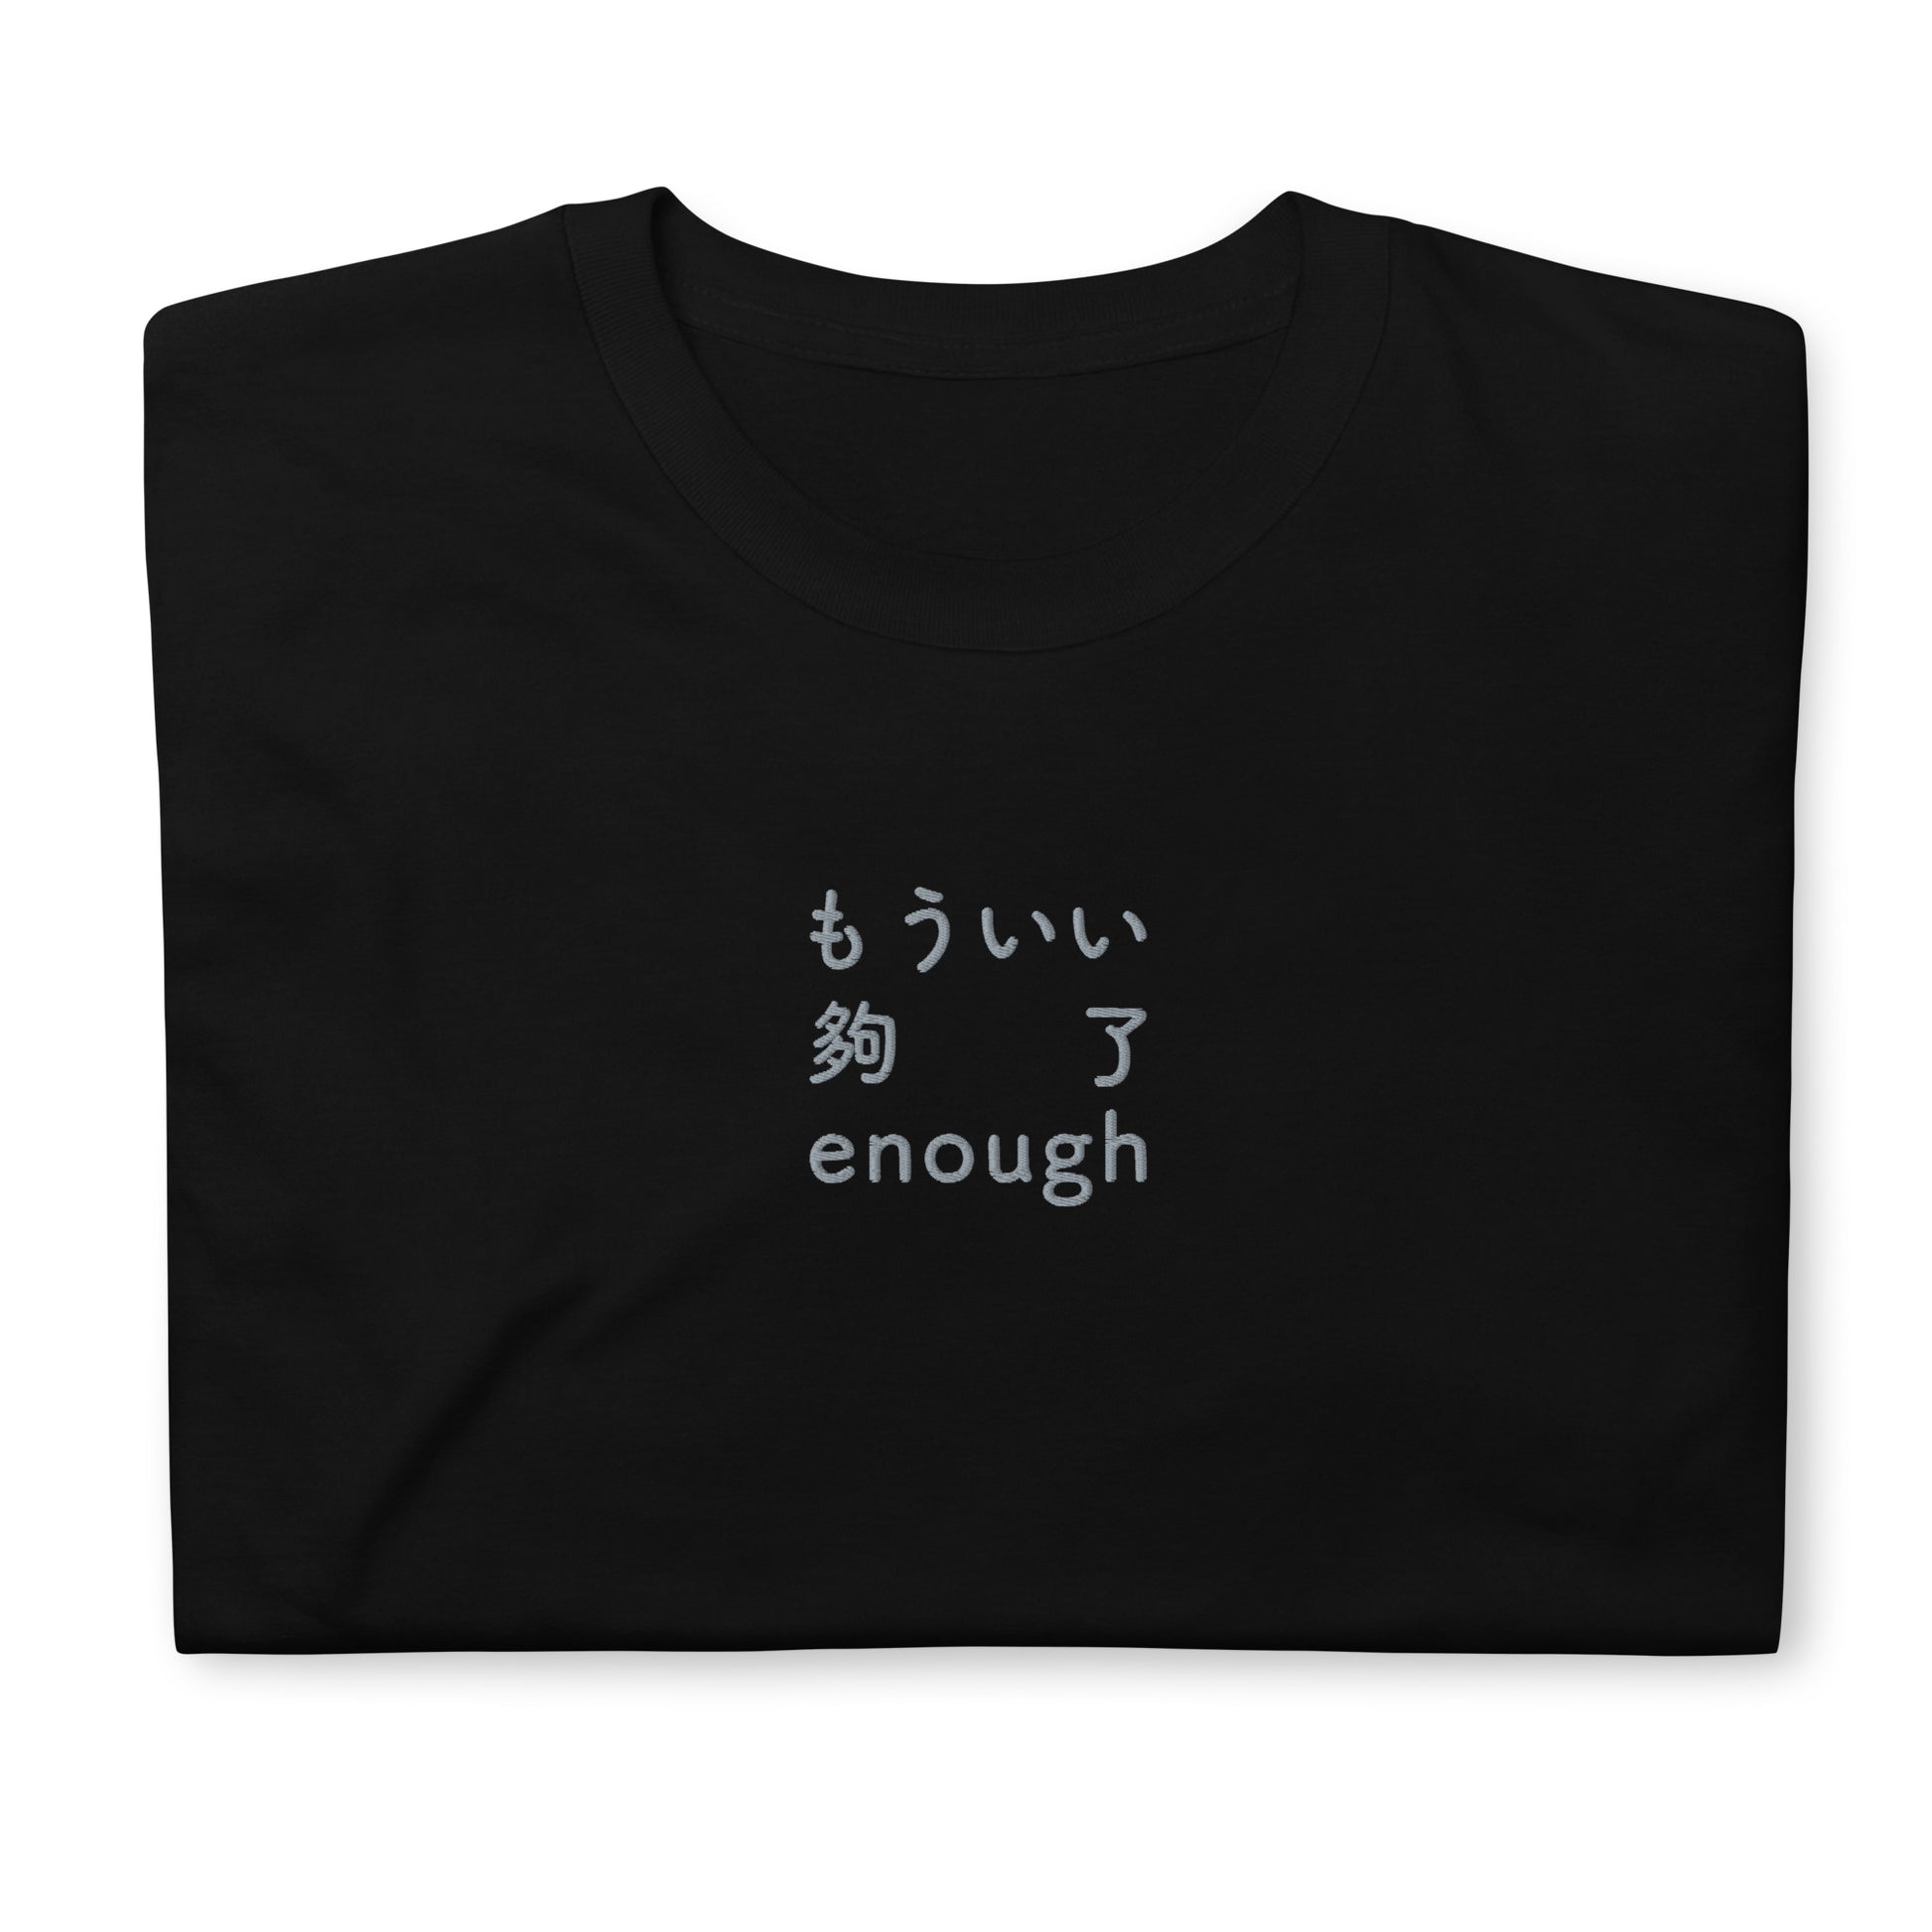 Black High Quality Tee - Front Design with an light gray Embroidery "Enough" in Japanese,Chinese and English